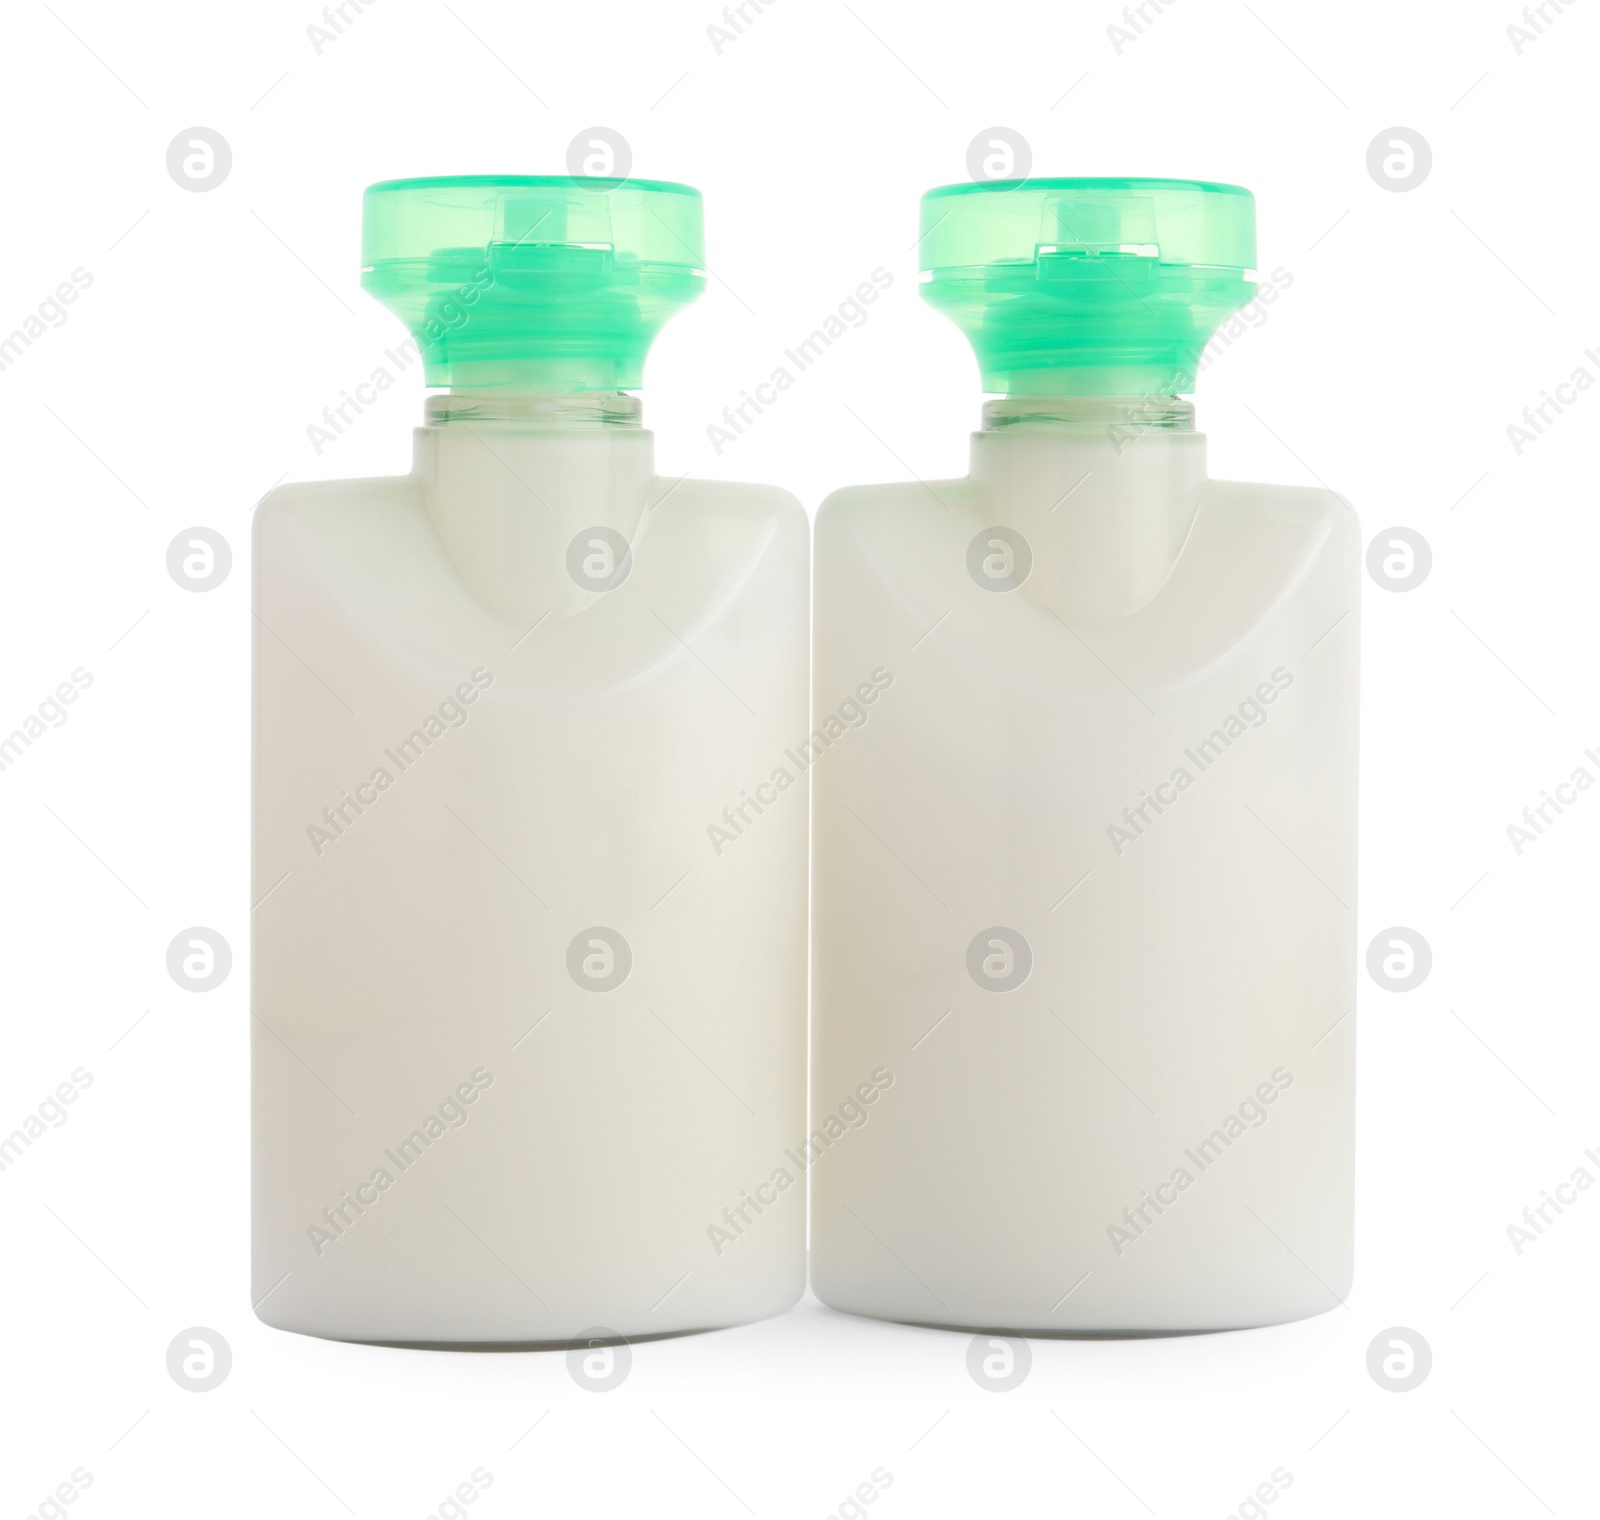 Photo of Mini bottles of cosmetic products isolated on white